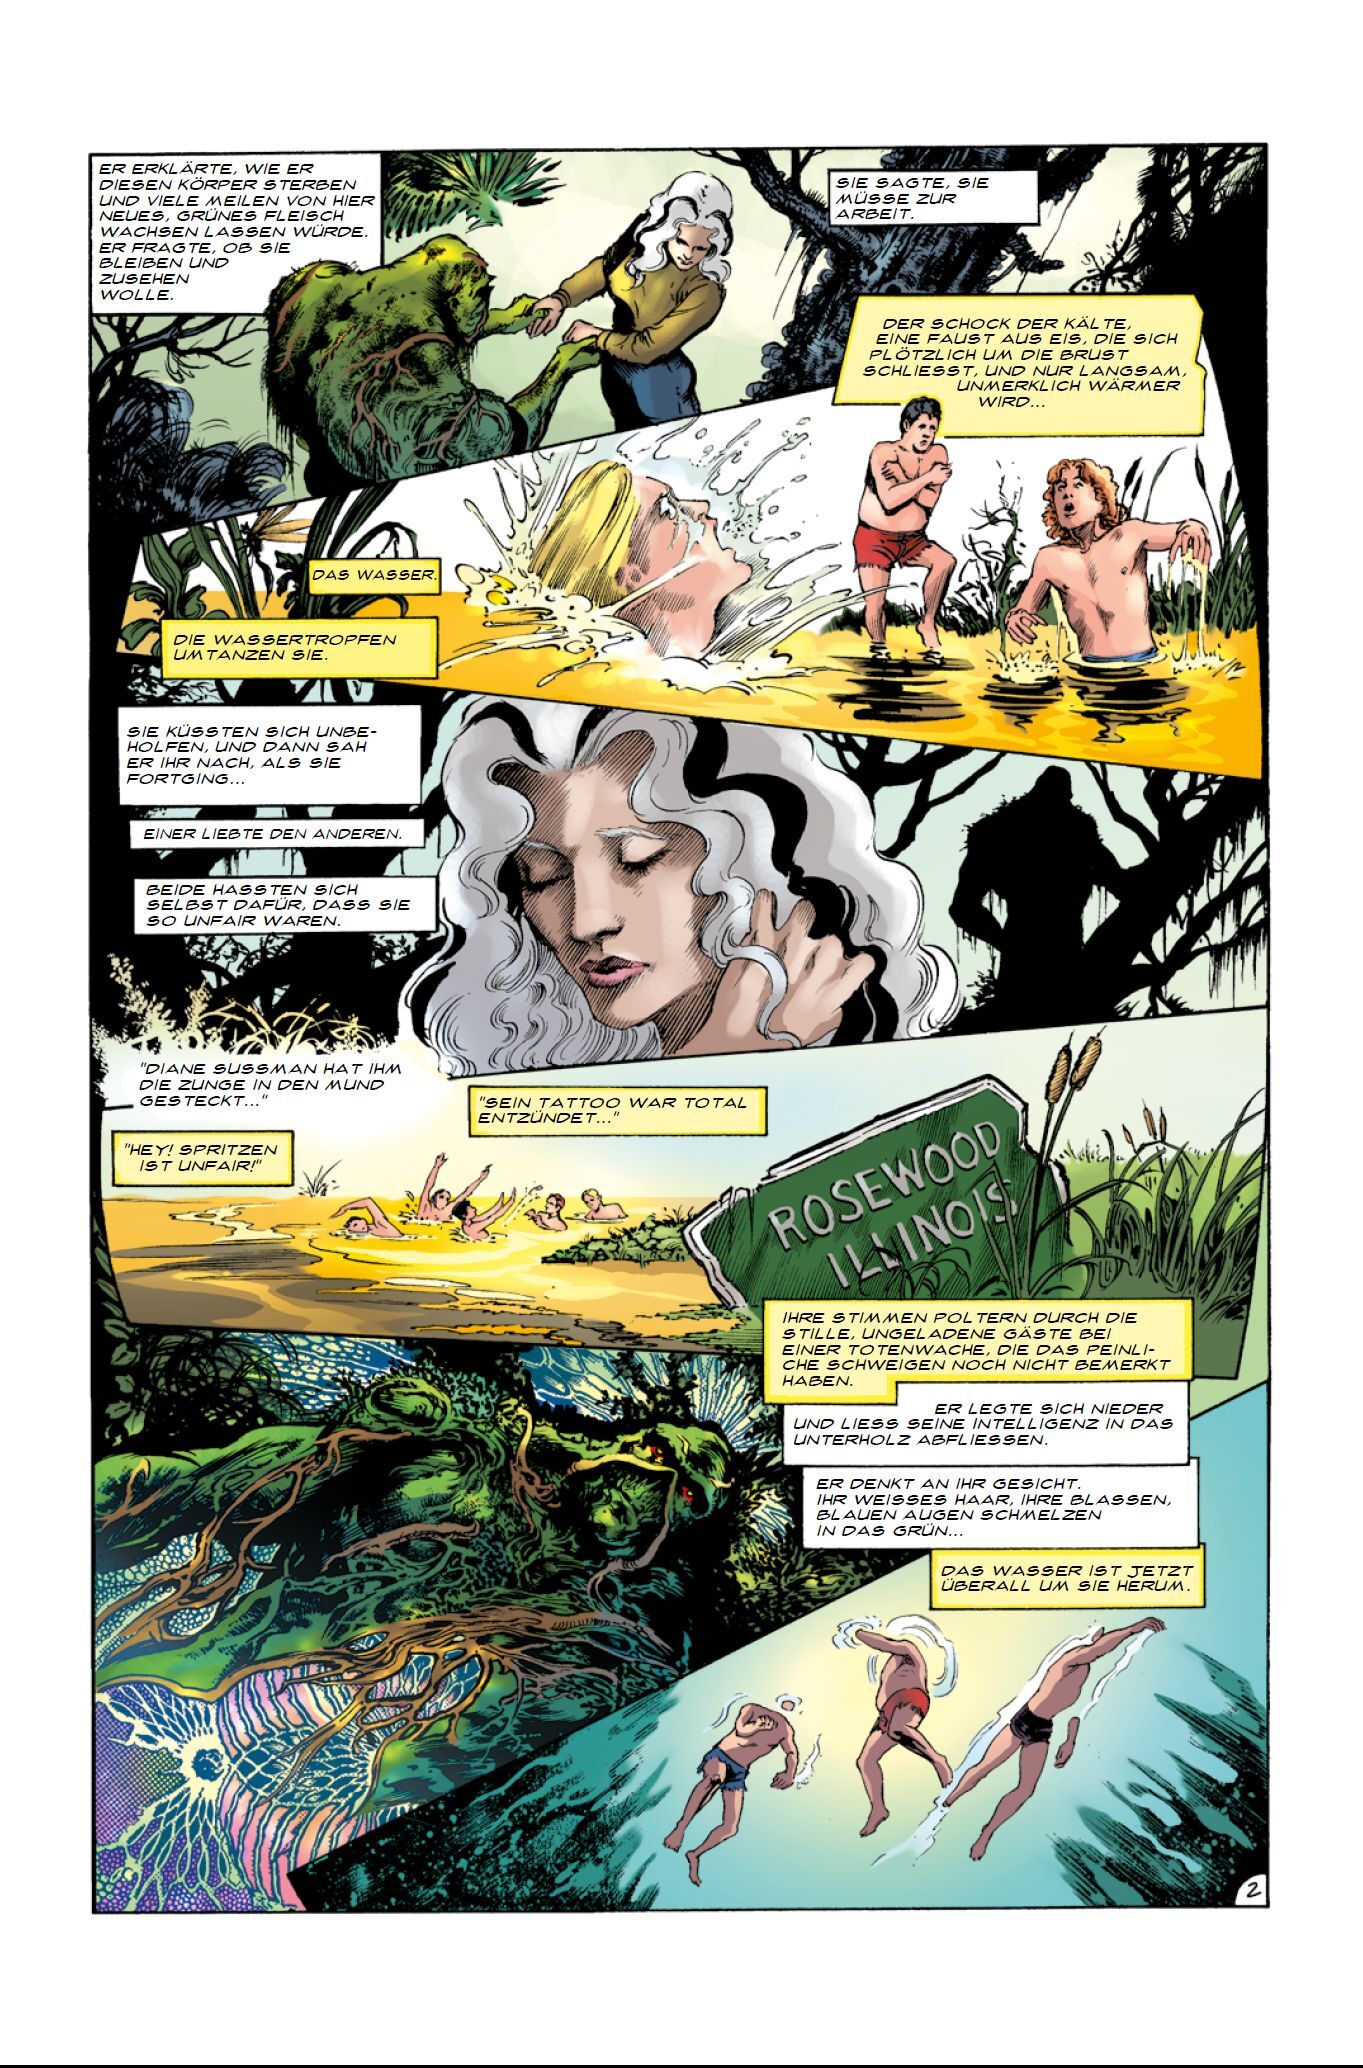 Swamp Thing von Alan Moore (Deluxe Edition)